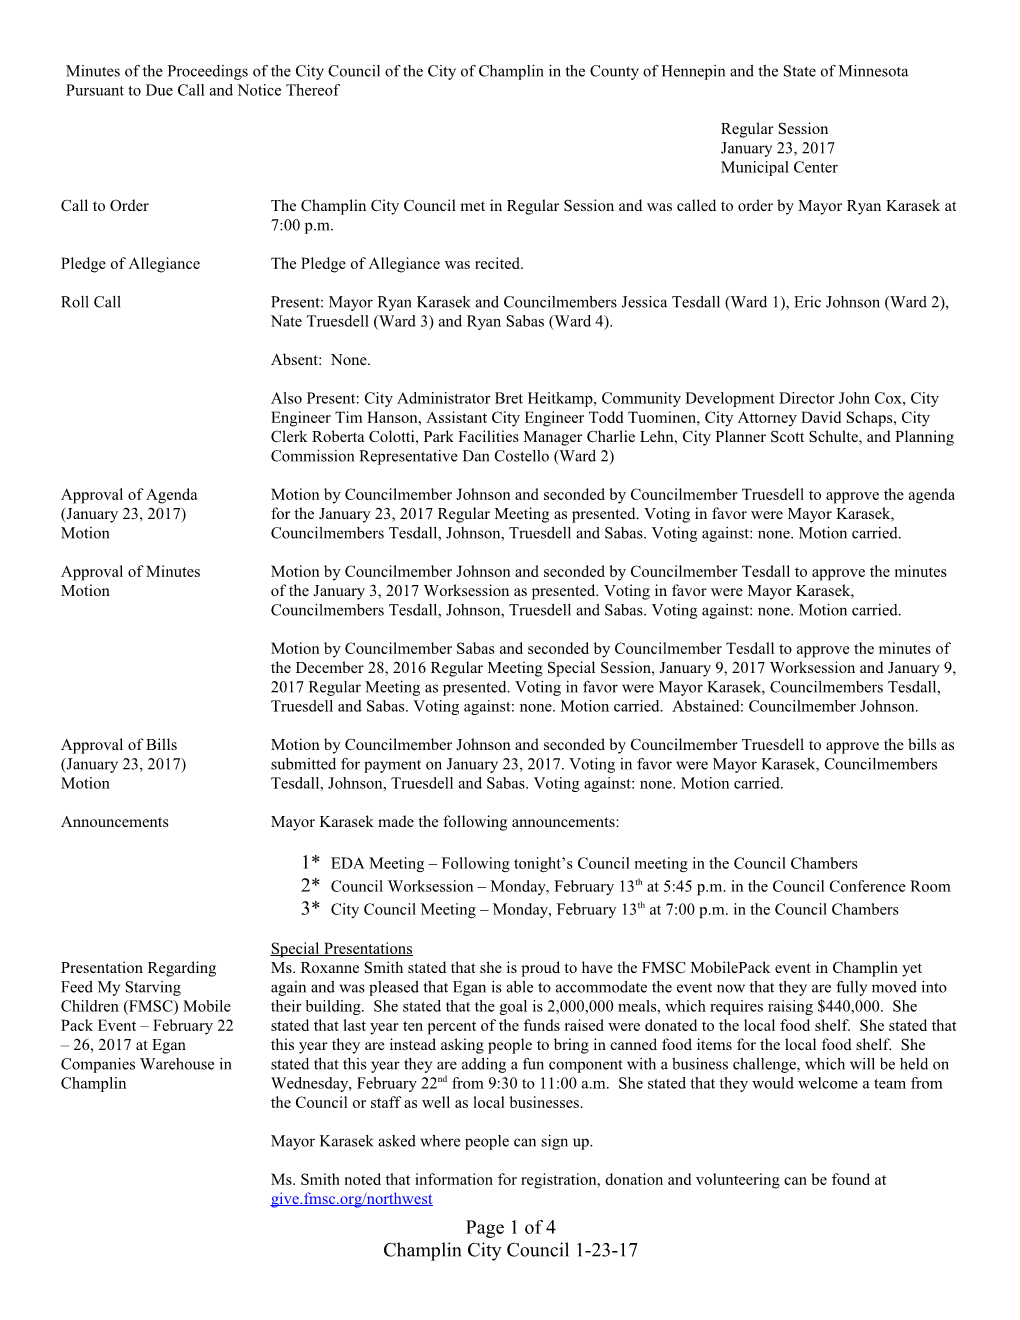 Minutes of the Proceedings of the City Council of the City of Champlin in the County Of